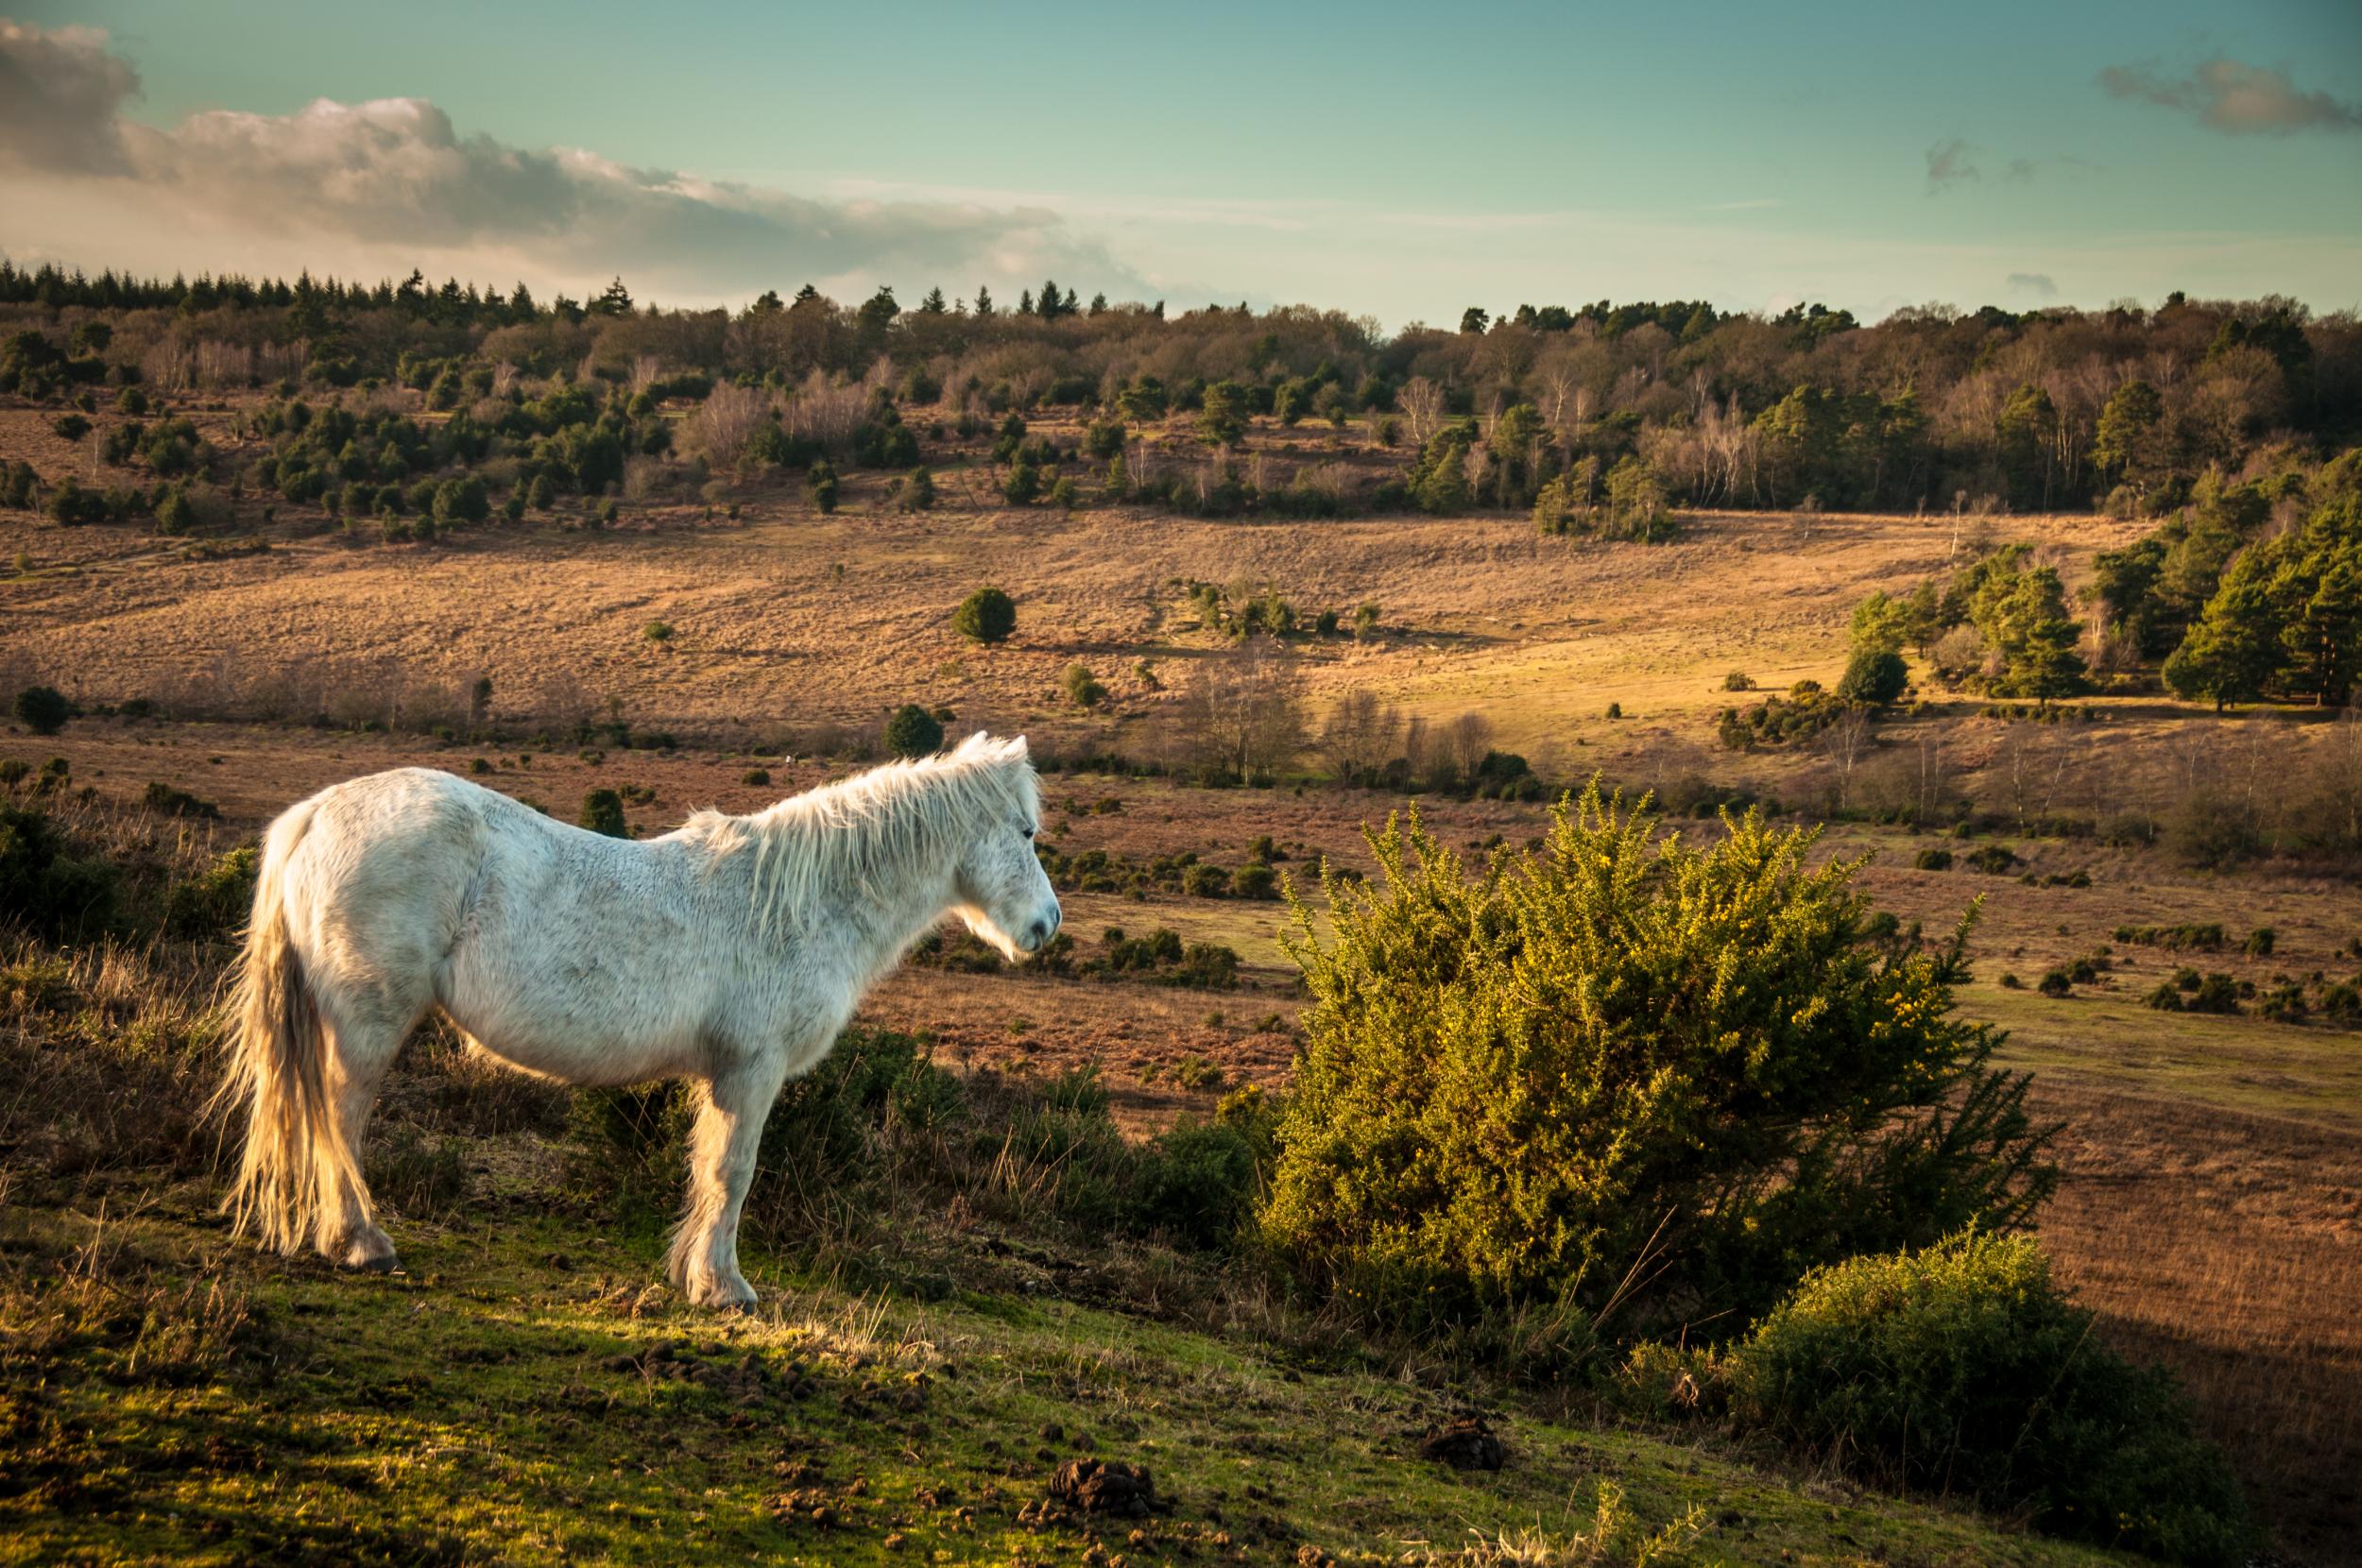 Ponies roam the New Forest, one of England’s most popular nature locations